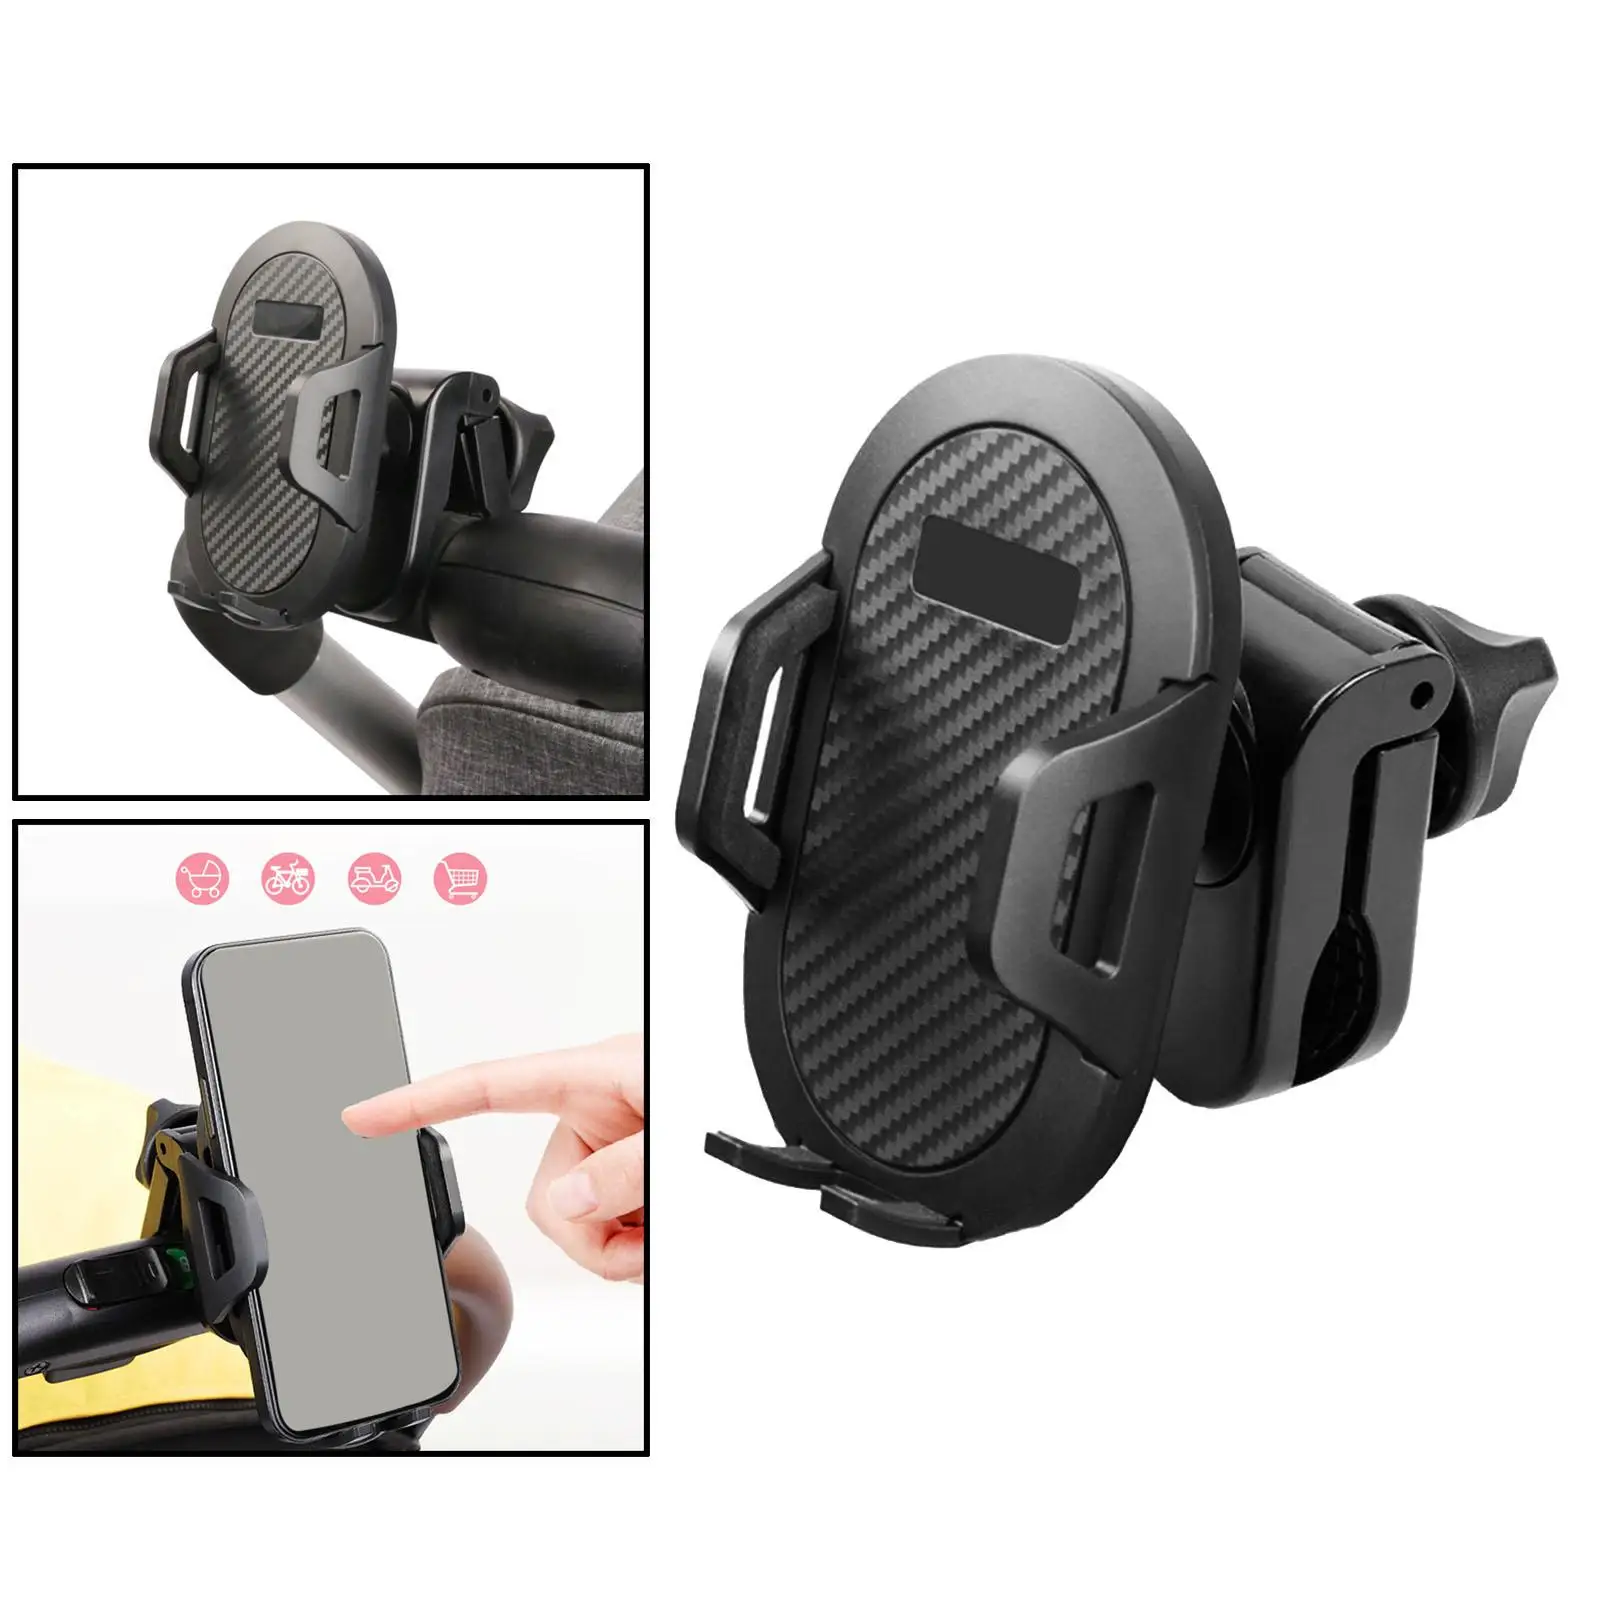 Universal Baby Stroller Cell Phone Holder Aeecssory 360 Degree Rotate Mount Bracket for Bicycle Electric Vehicles Shopping Carts